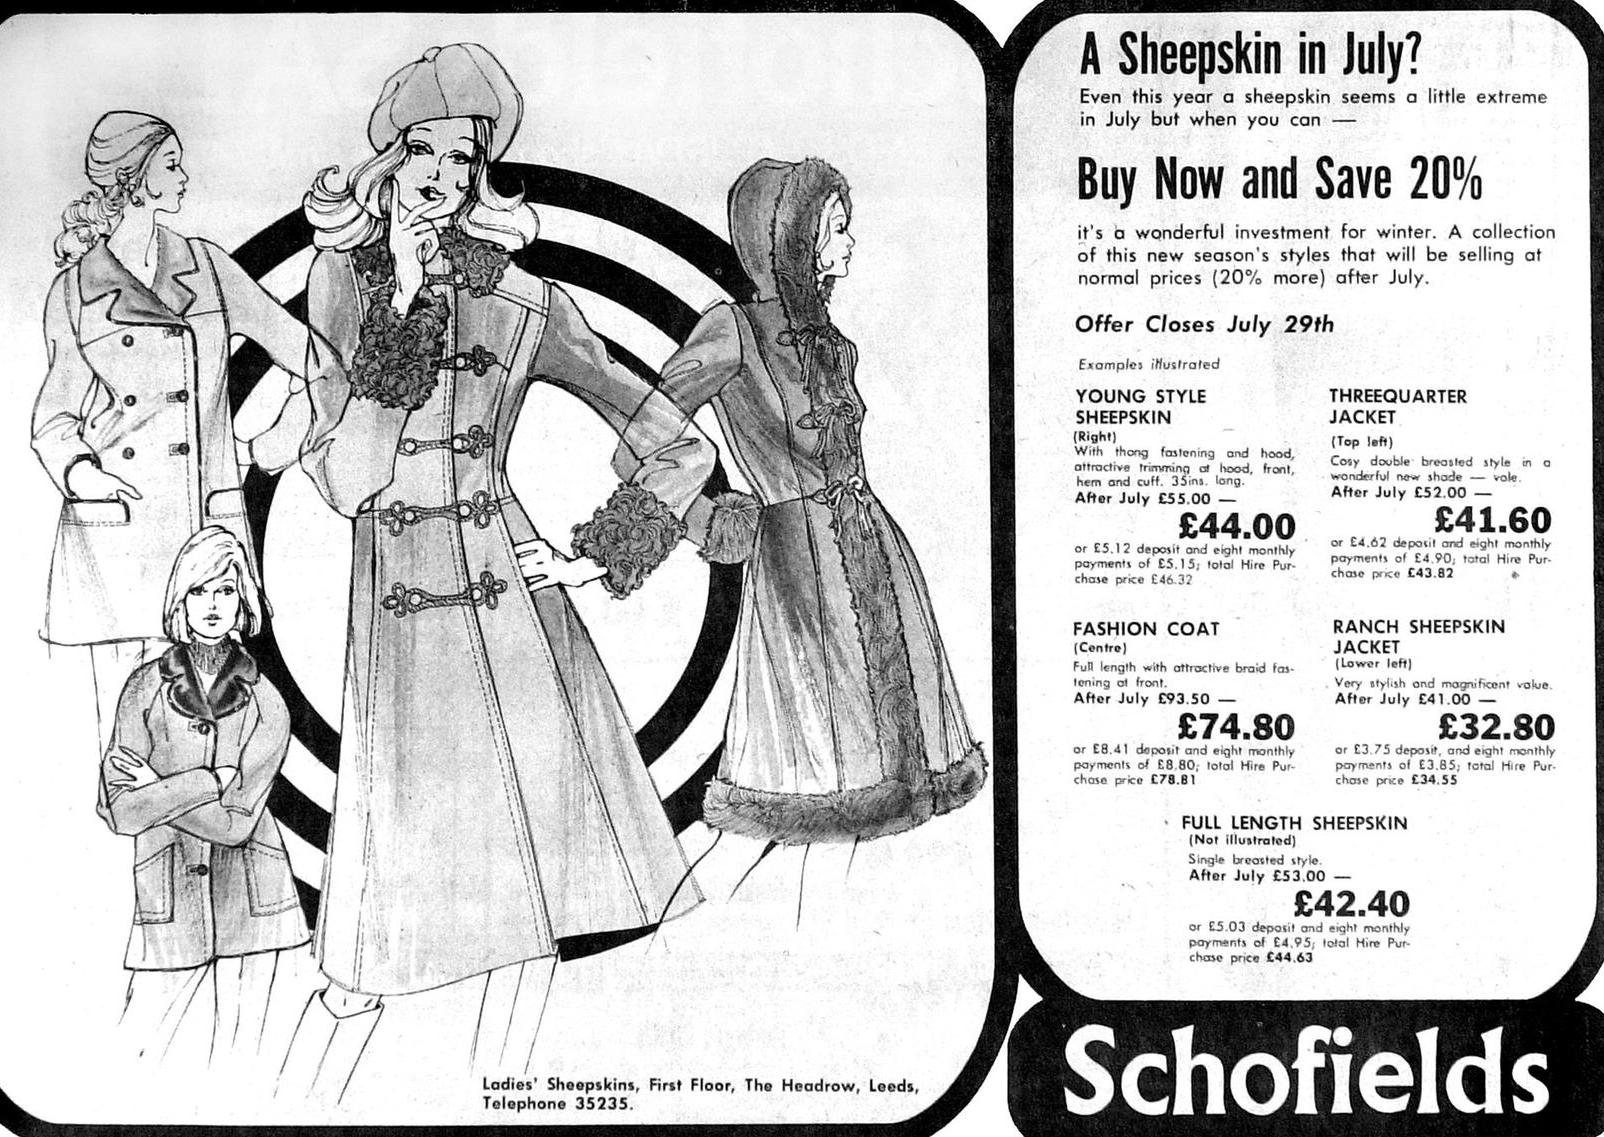 Which of these brands do you remember the most? This is an advert for Schofields in 1972.